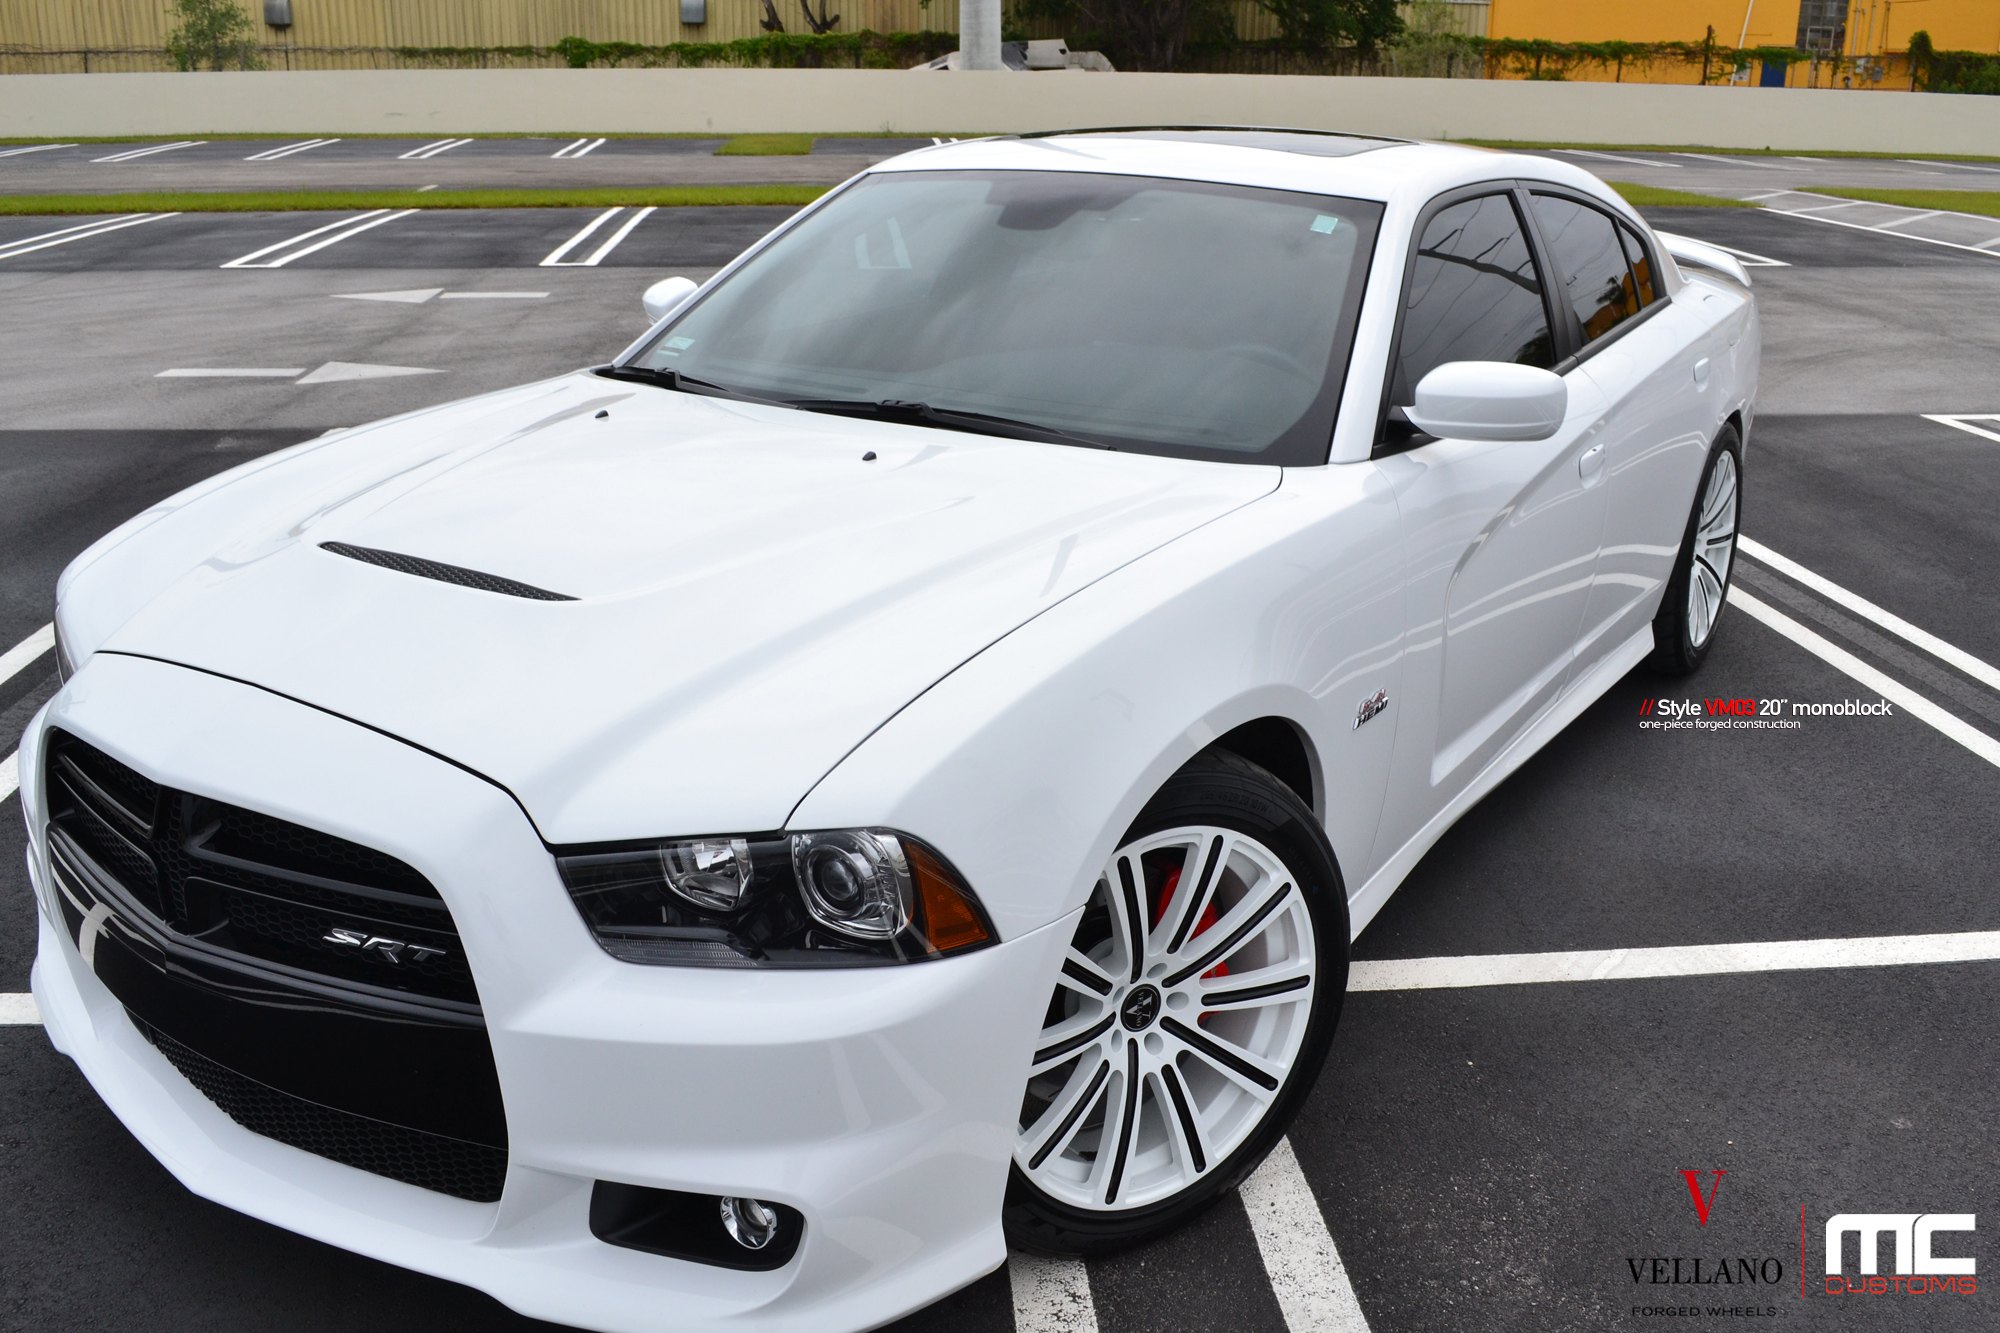 White Dodge Charger with Aftermarket Hood - Photo by Vellano